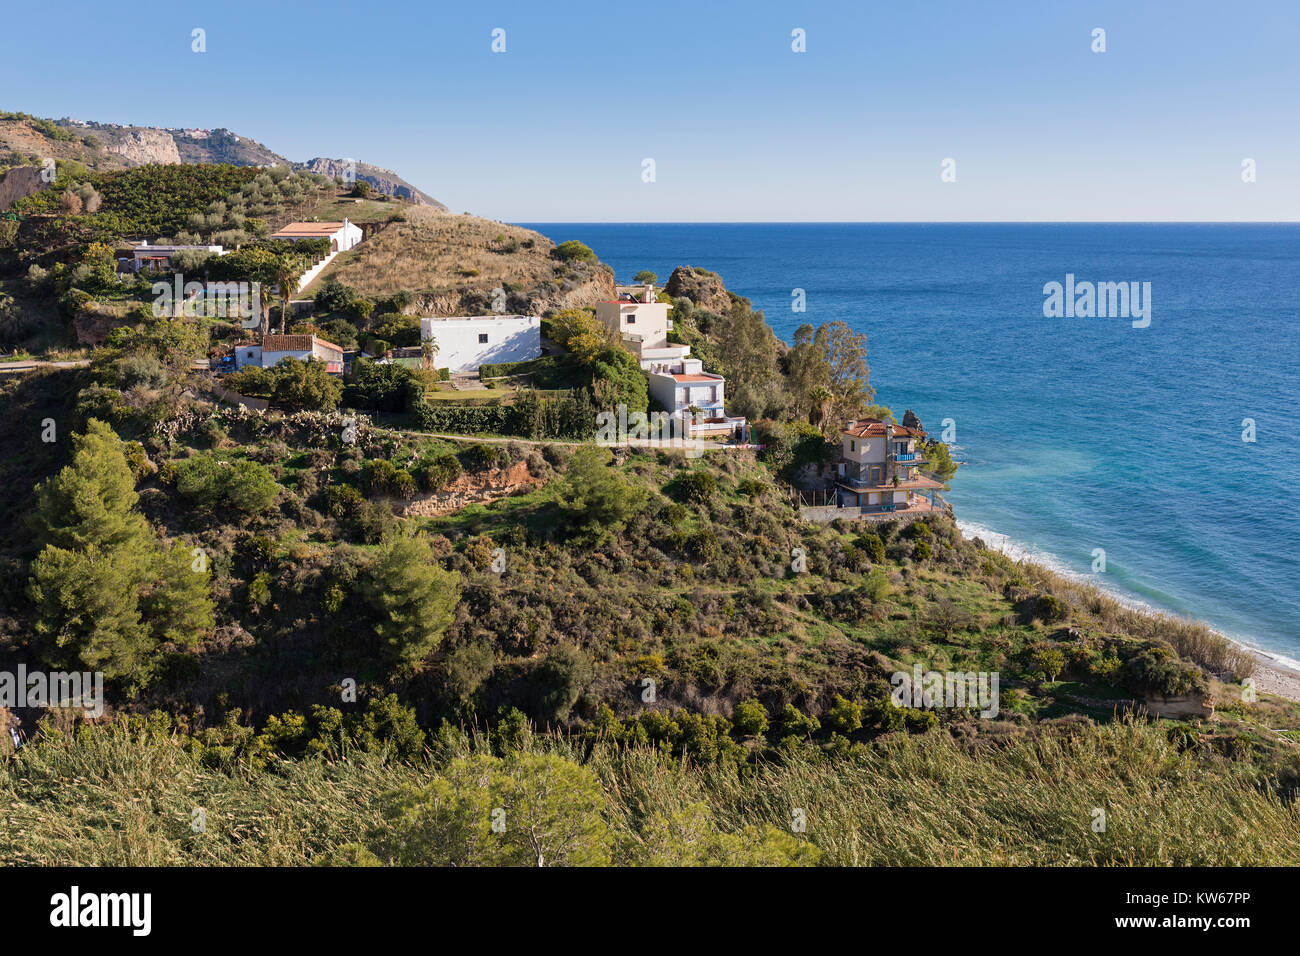 near Nerja, Costa del Sol, Malaga Province, Andalusia, southern Spain.  Property overlooking the Mediterranean within the protected area of Acantilado Stock Photo